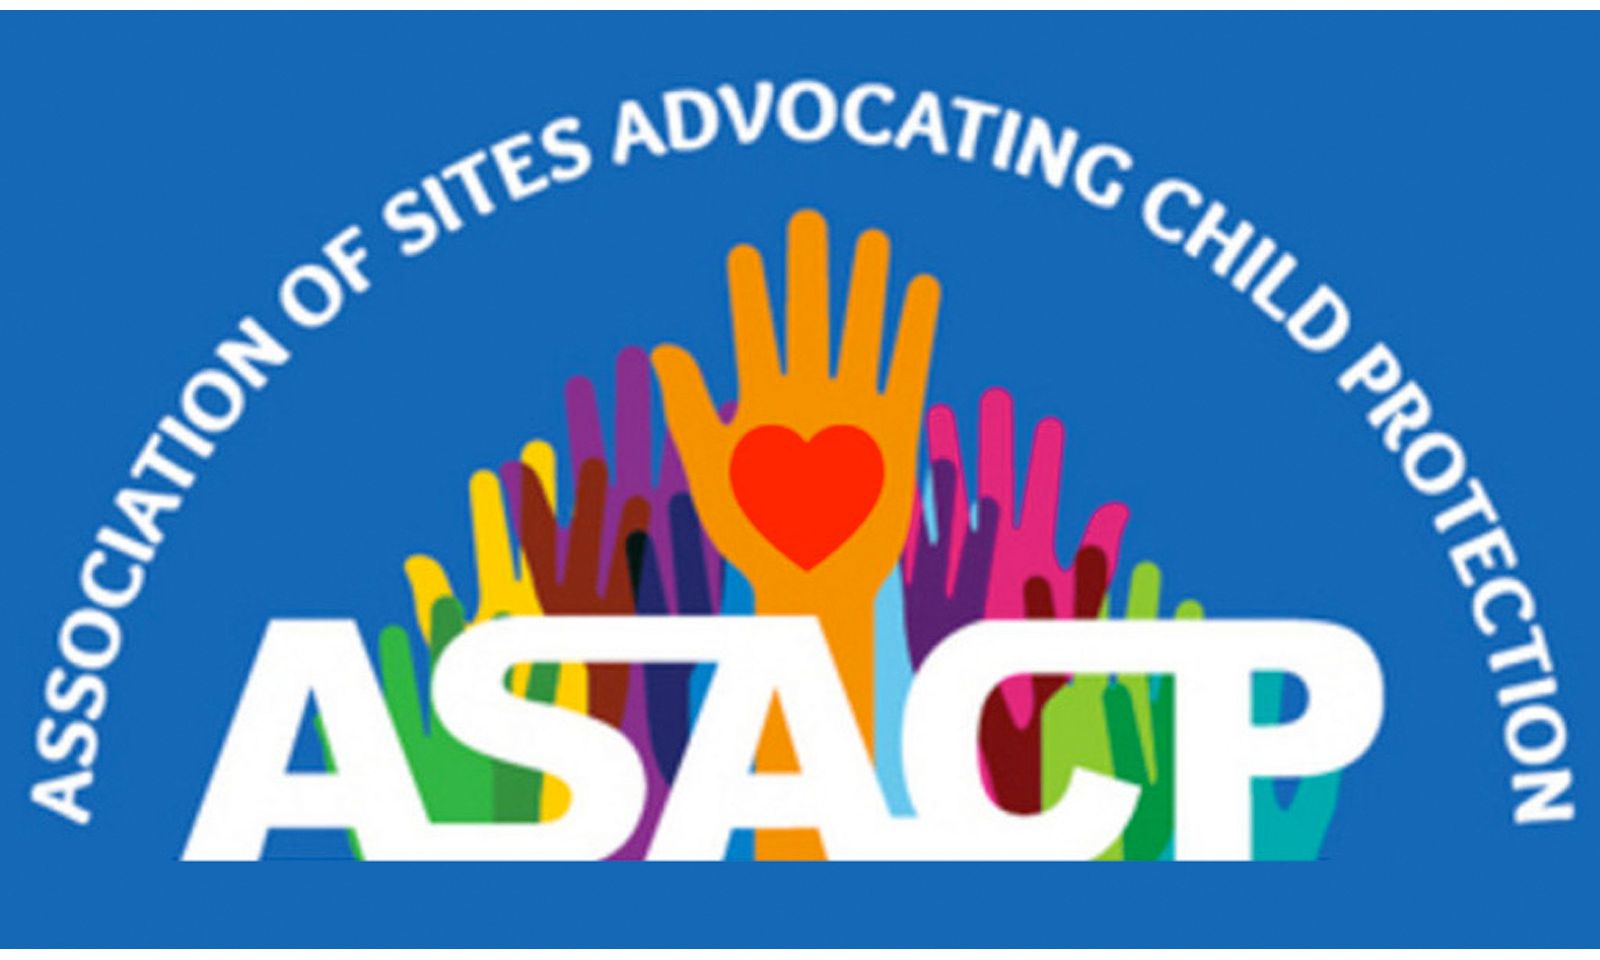 ASACP Featured Sponsors for November 2016 Honored